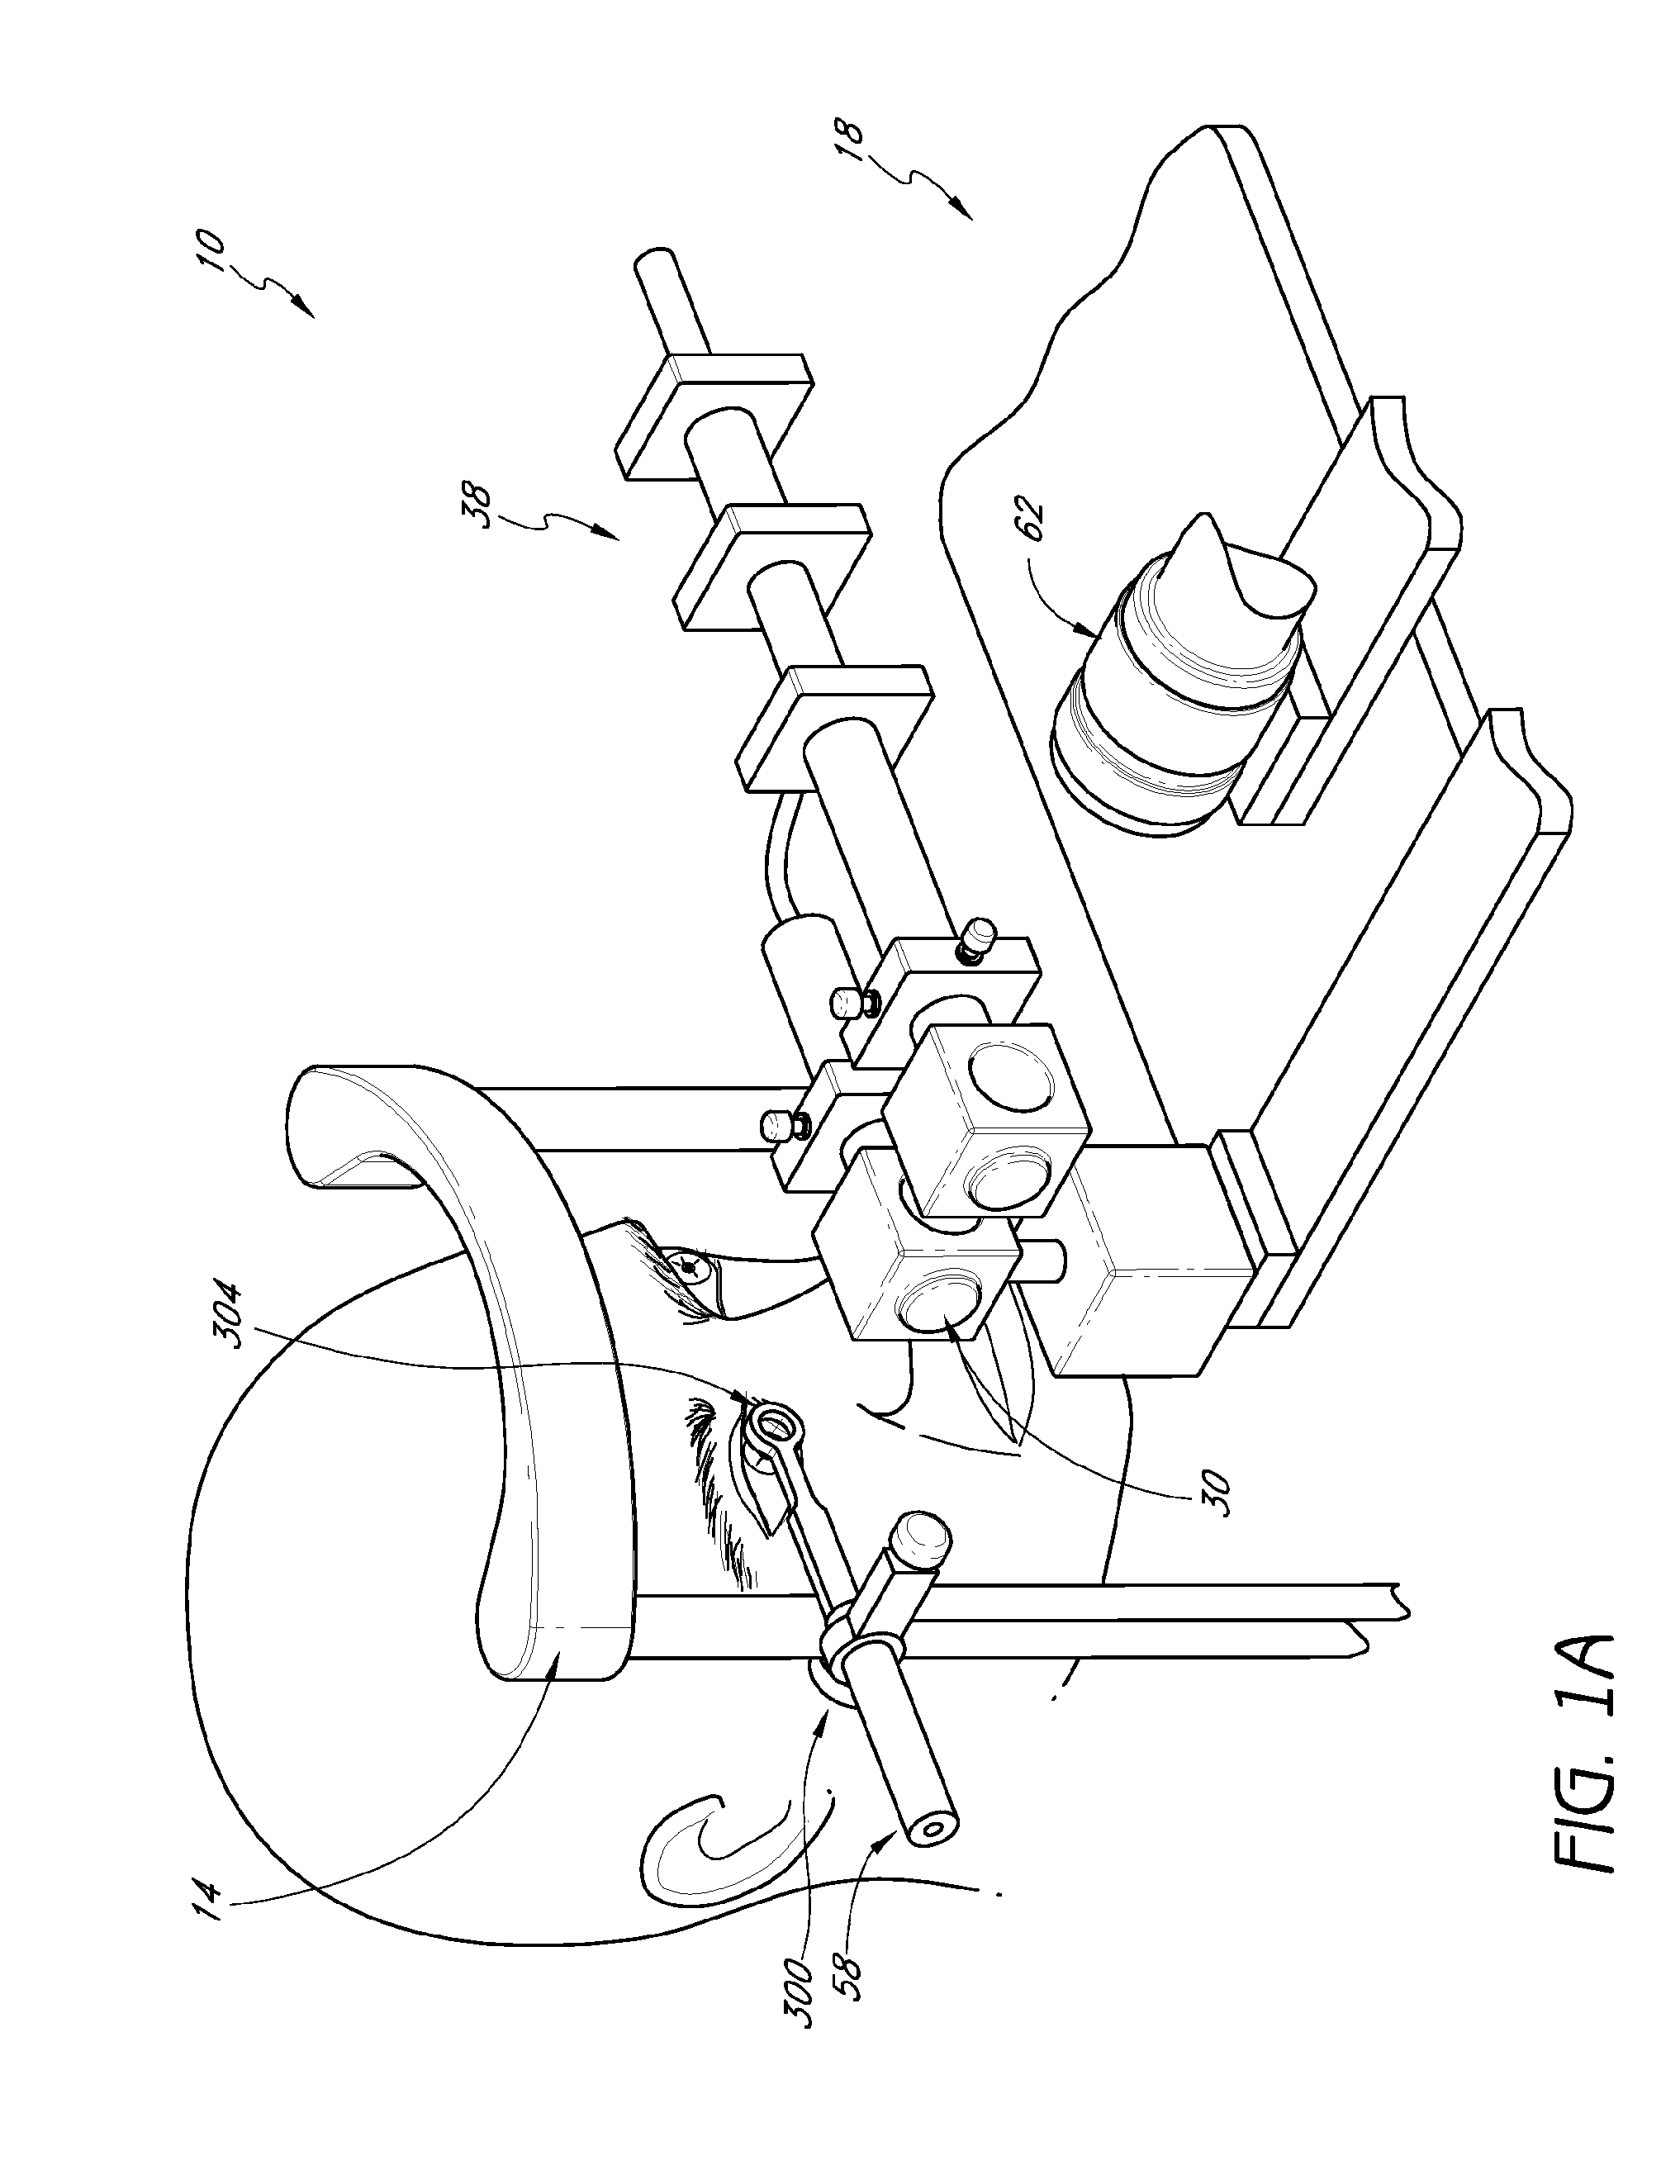 Method and apparatus for centration of an ocular implant